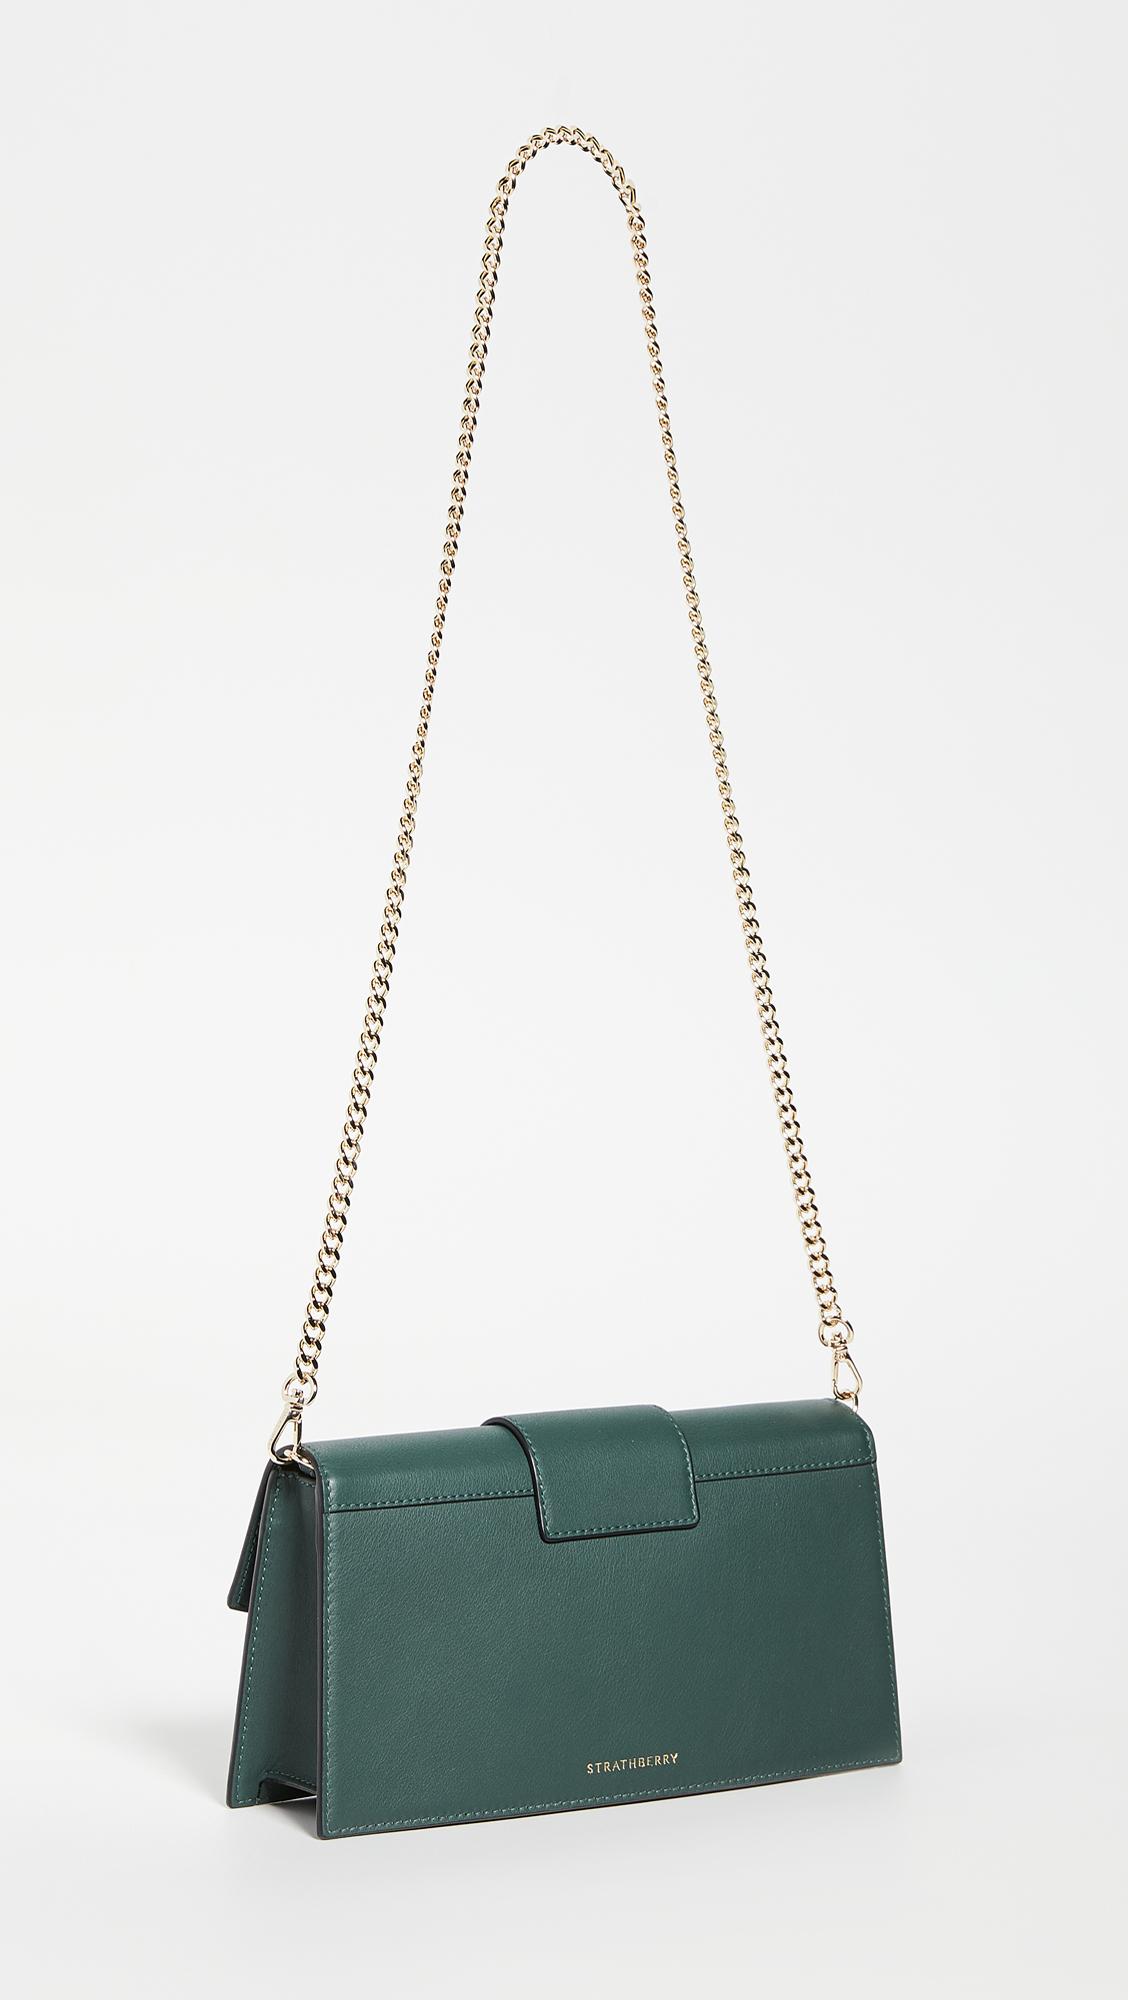 Strathberry Leather Mini Crescent Bag in Bottle Green (Green) - Lyst